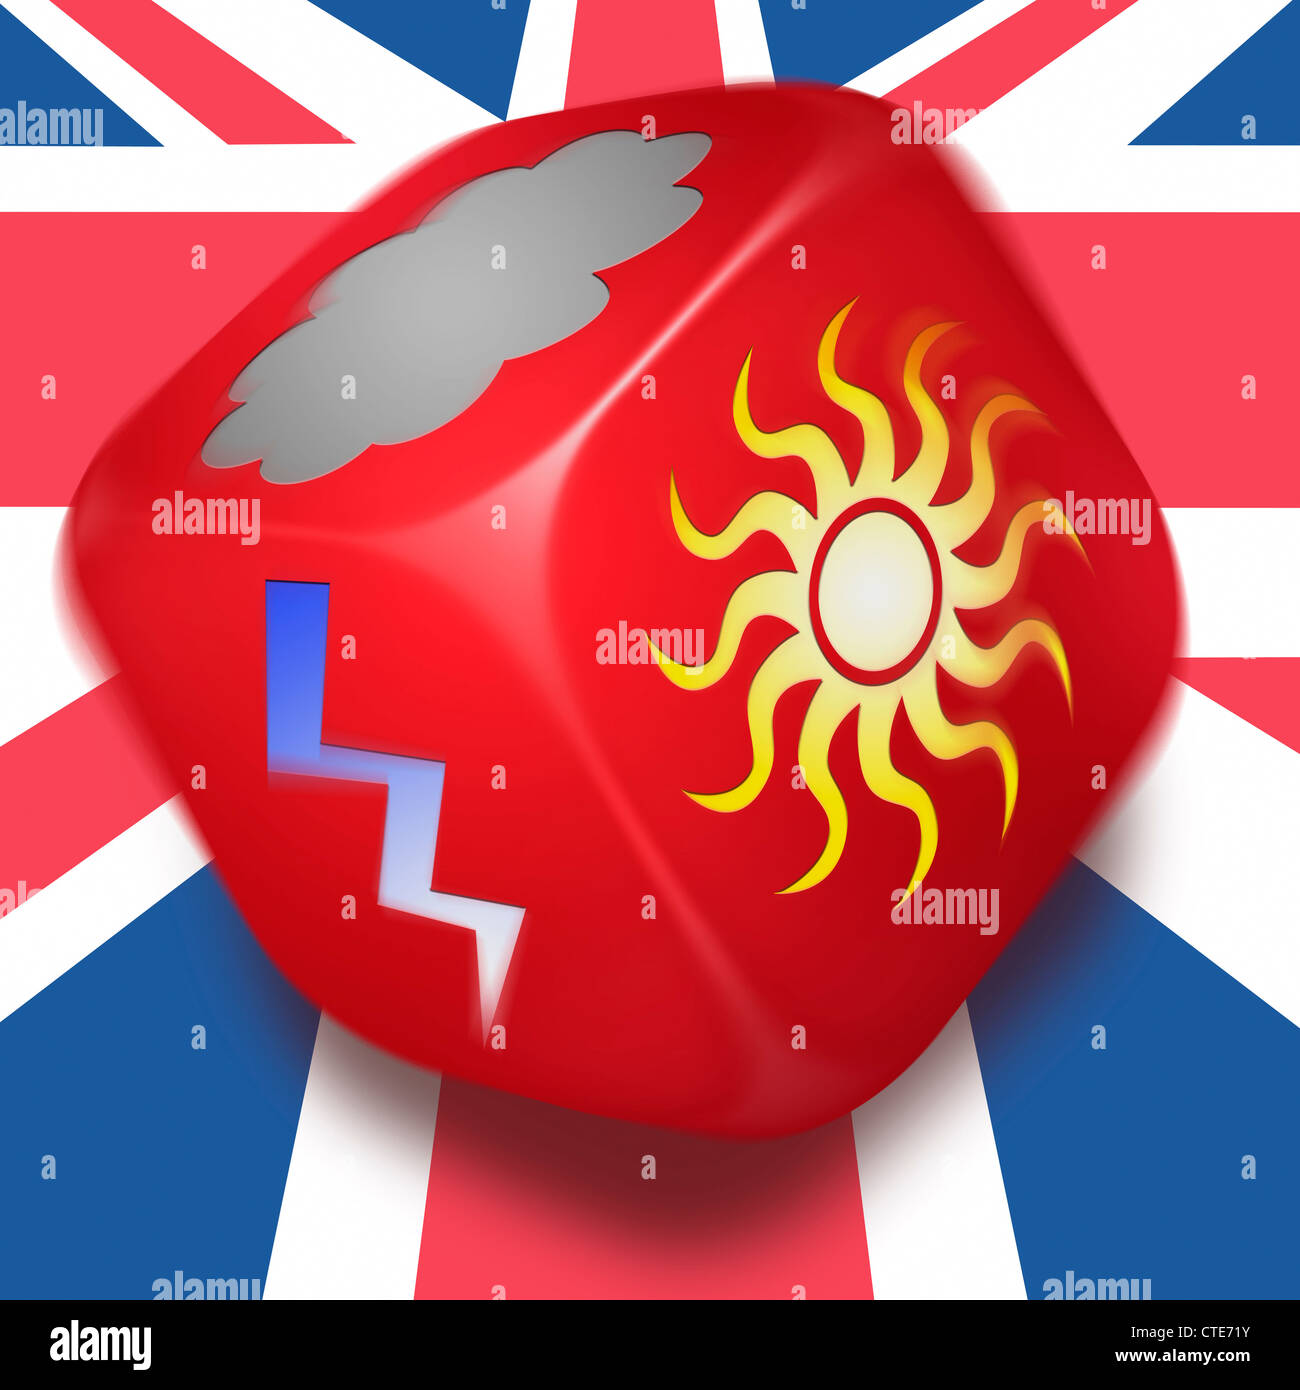 Rolling dice on a Union Jack Flag background with various weather symbols printed on each side. Sun, Thunder/Lightning and Cloud Stock Photo